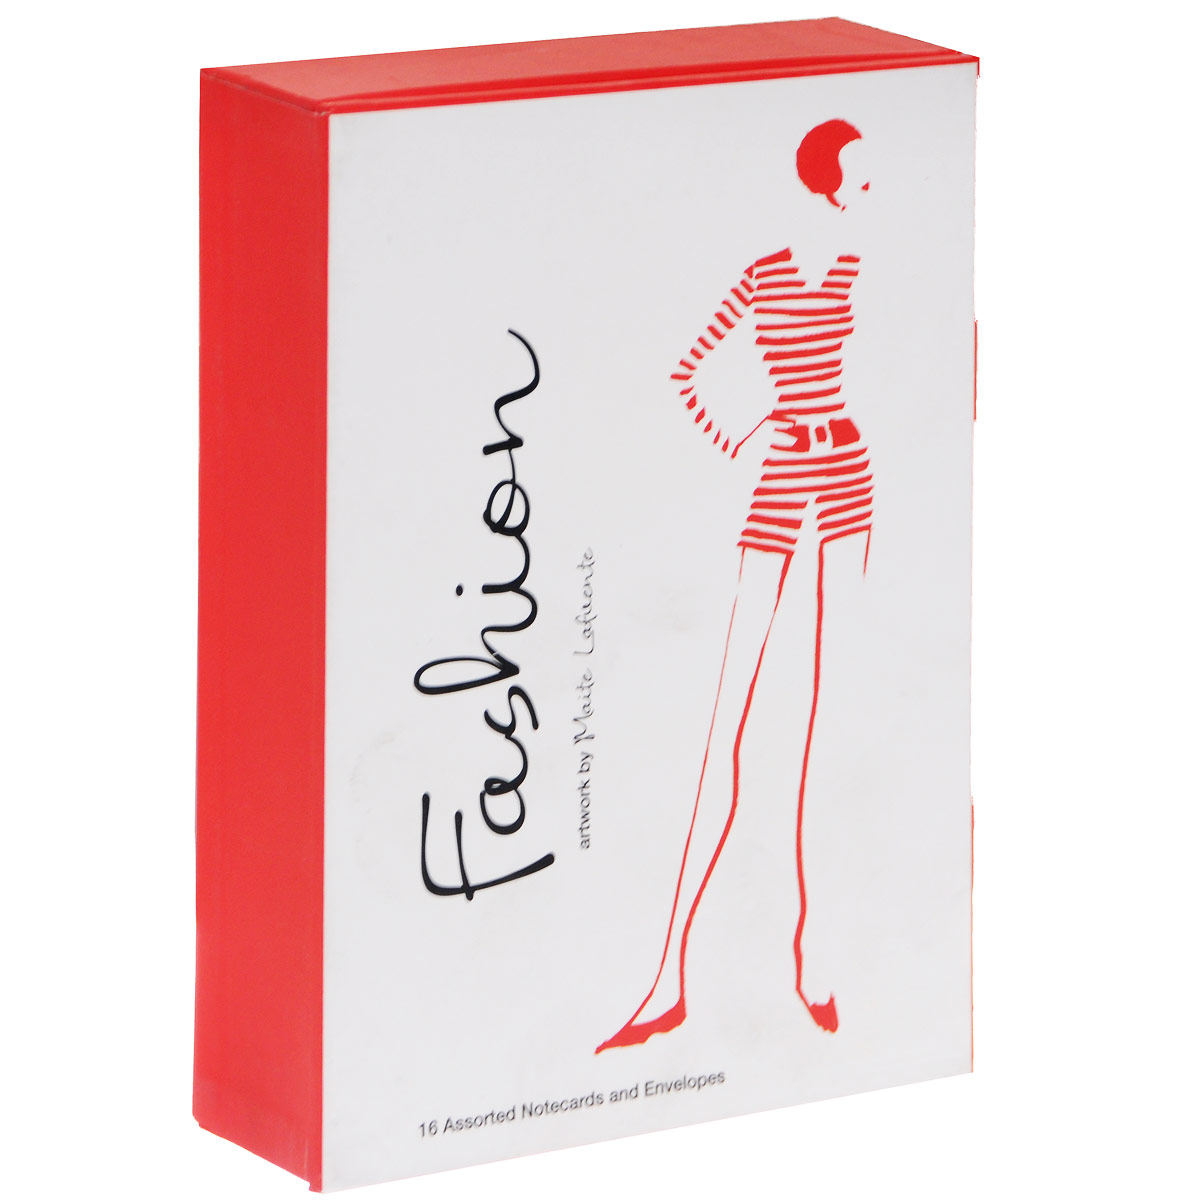 Fashion Note Cards Artwork by Maite LaFuente: 16 Assorted Note Cards and Envelopes